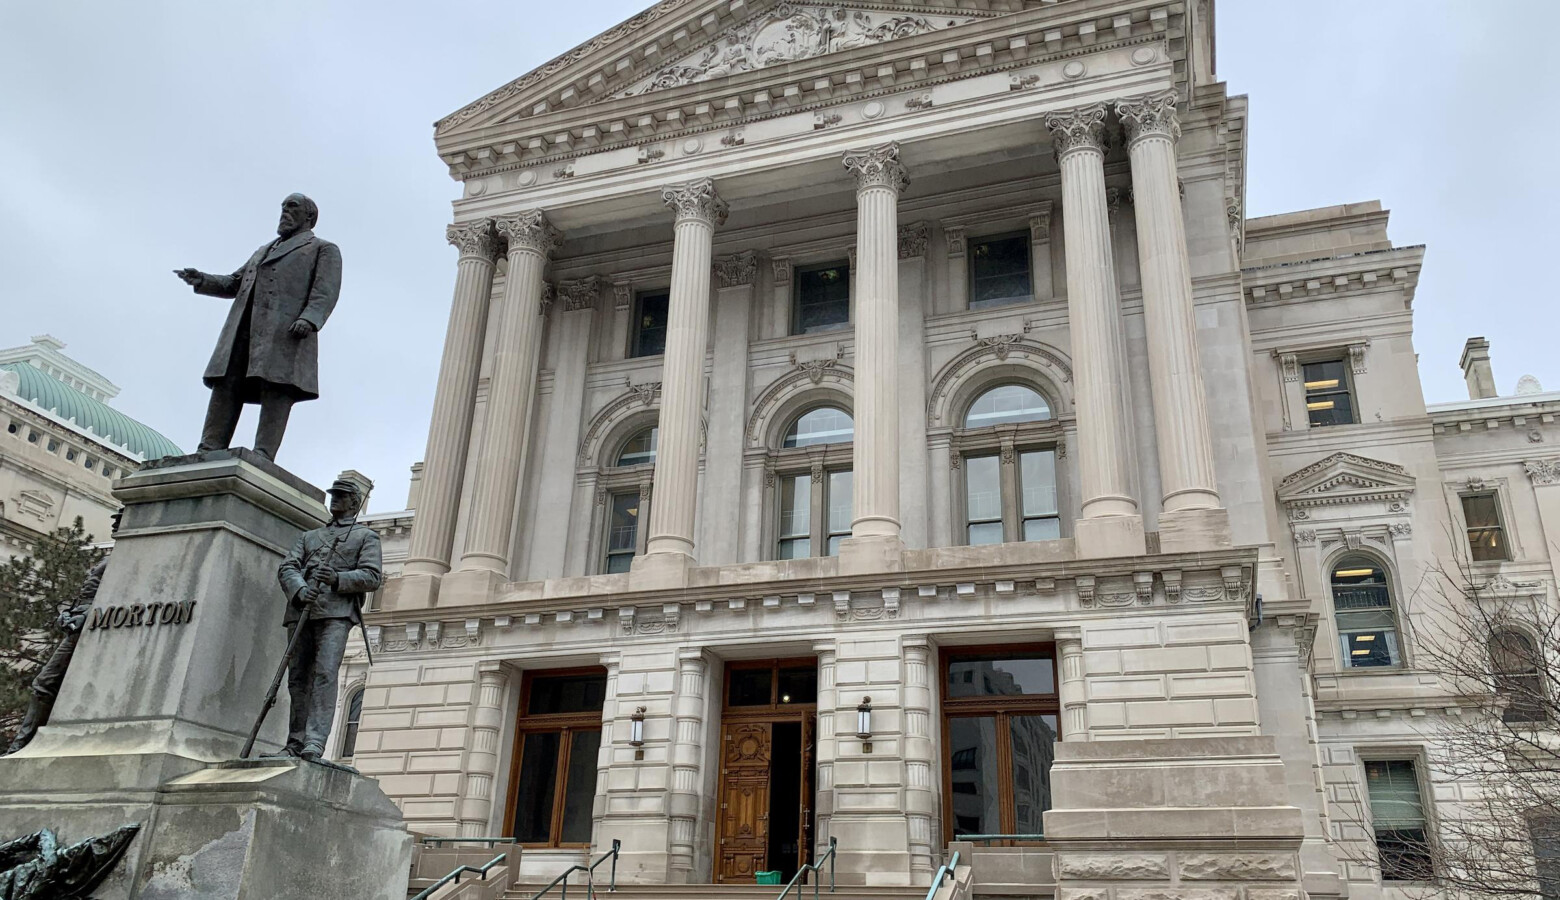 Legislation approved by the Indiana House would require doctors tell patients medication-induced abortions can be reversed – a claim called unproven and dangerous by leading medical organizations. (Brandon Smith/IPB News)